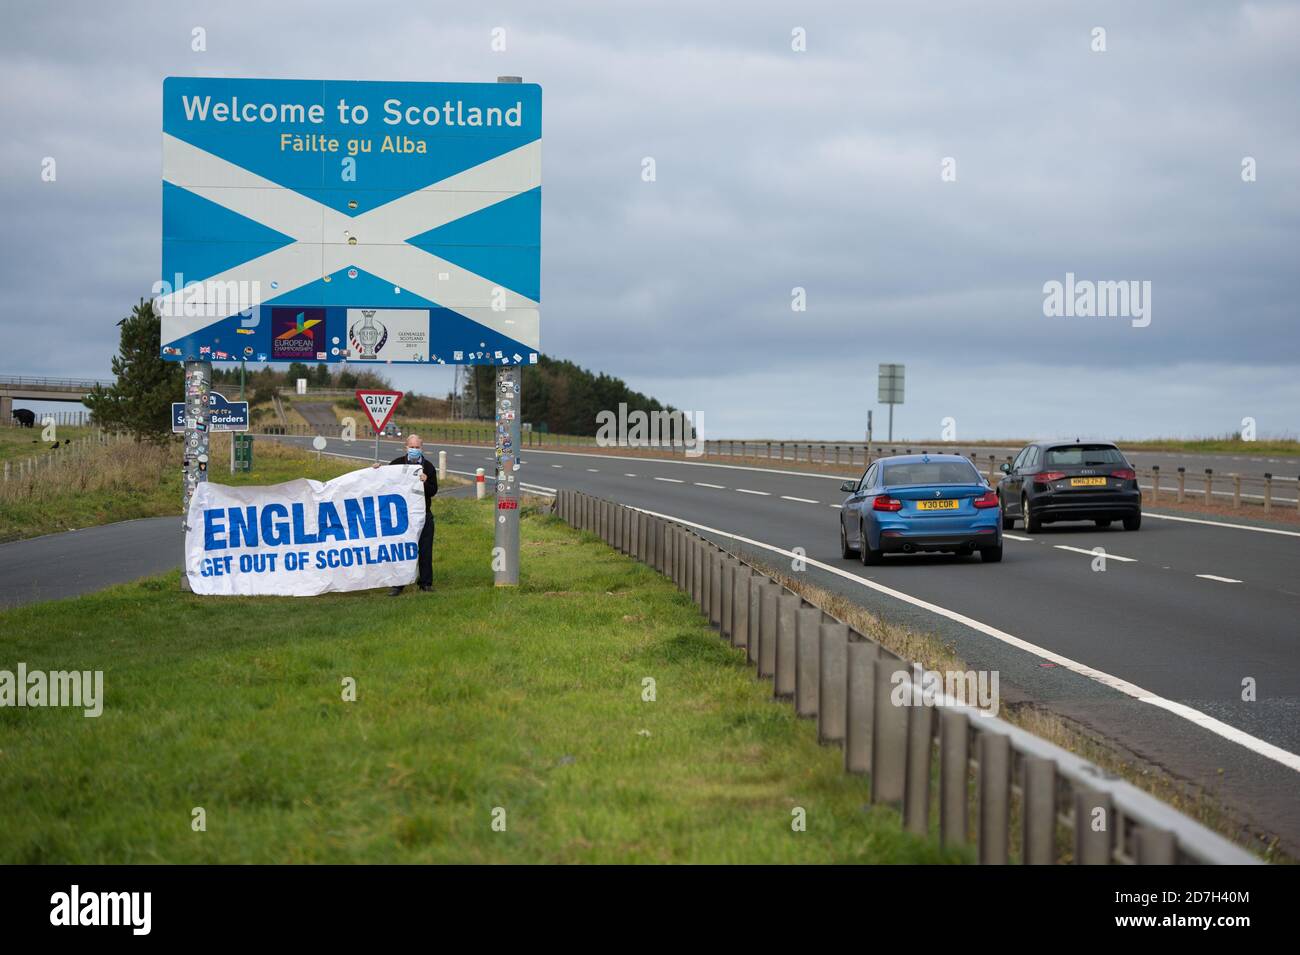 Scottish Border, Berwick-upon-Tweed, Scotland, UK. 16 October 2020. Pictured: Sean Clerkin of Action For Scotland protesting at the Scottish border near Berwick-Upon-Tweed, calling on the Scottish First Minister Nicola Sturgeon to close the border amid rising COVID19 cases.  Credit: Colin Fisher/Alamy Live News. Stock Photo